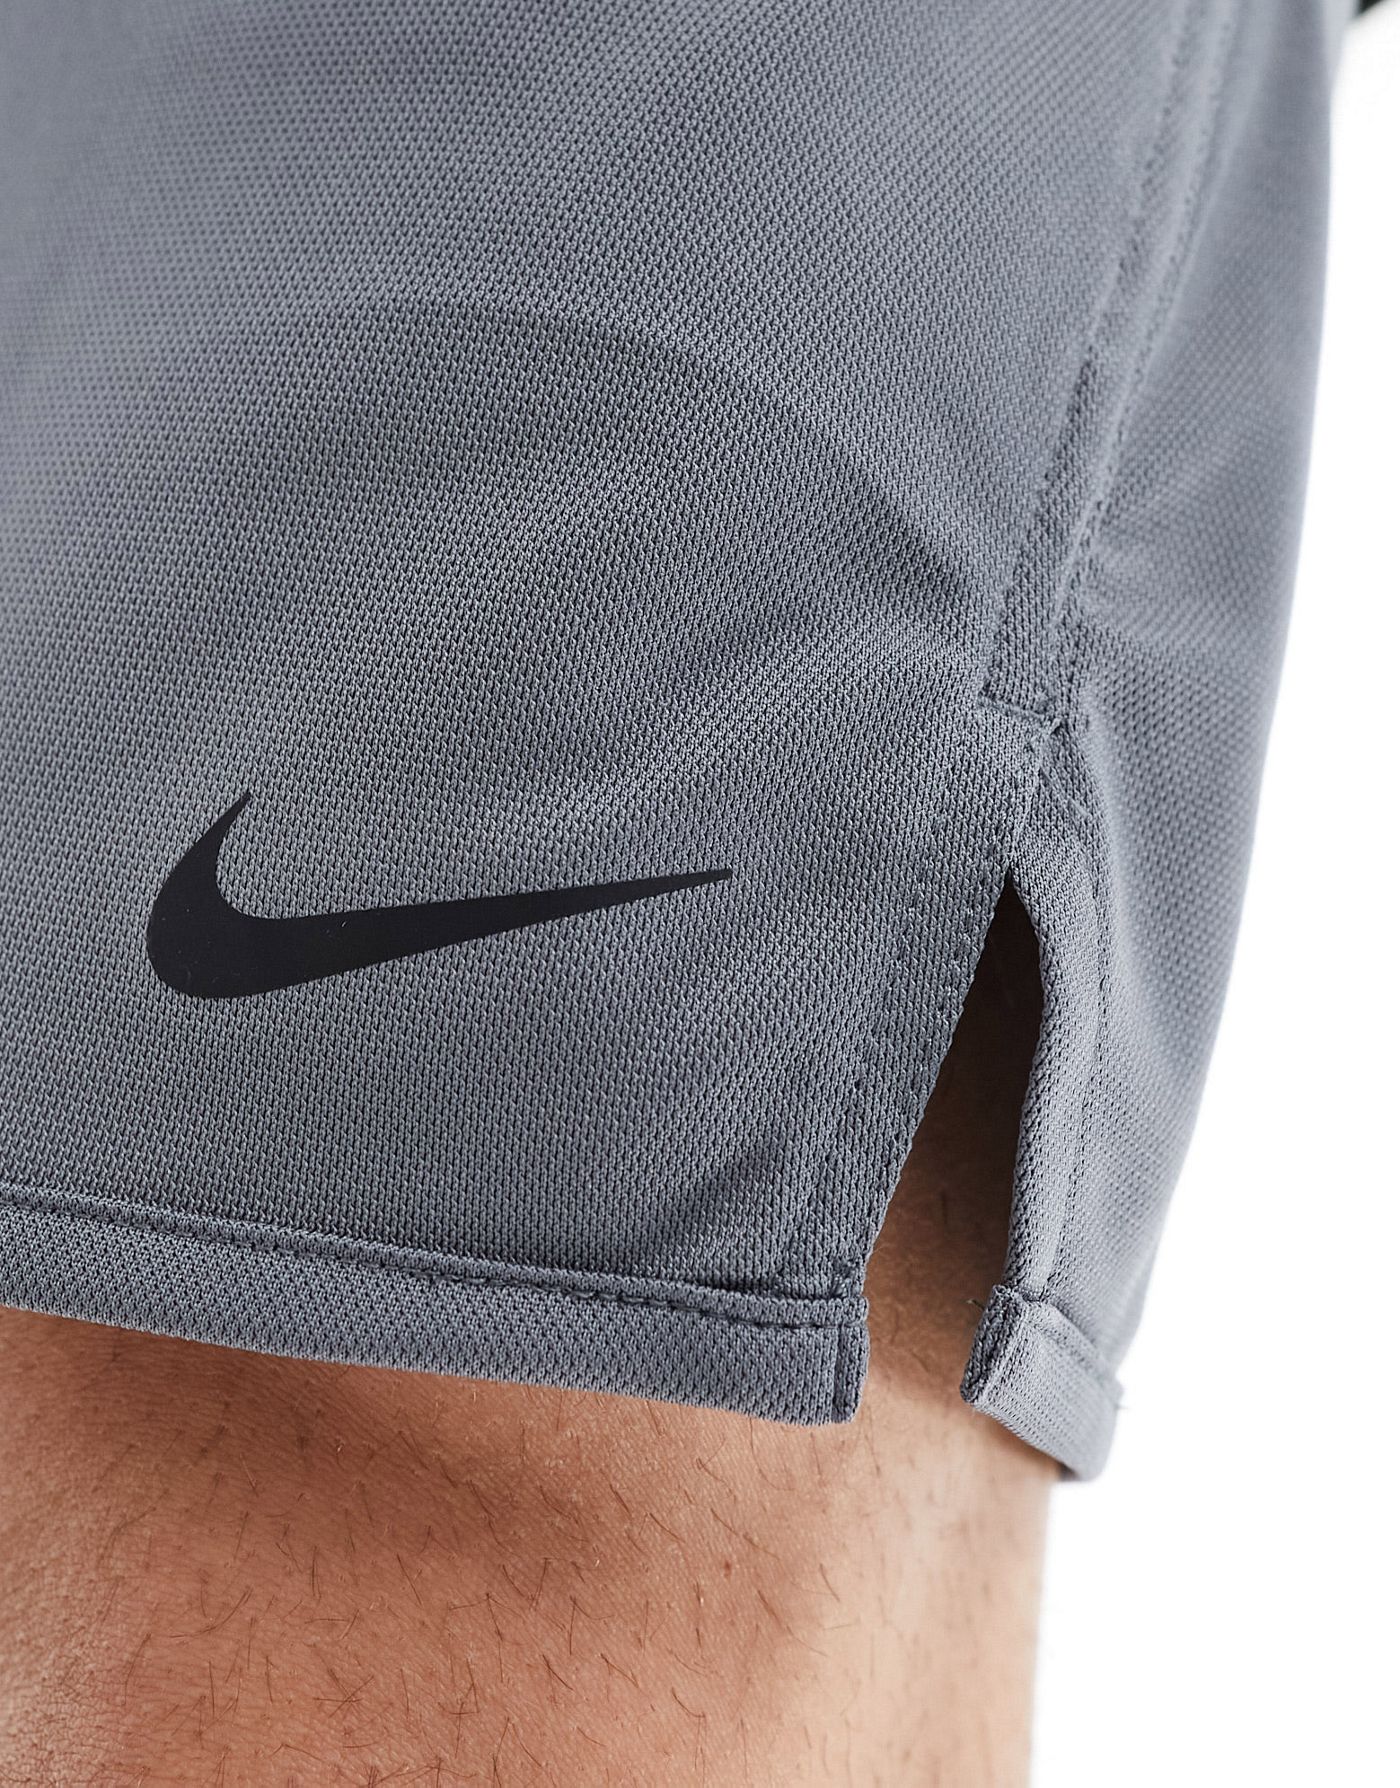  Nike Training Dri-FIT Totality knit 7in short in grey